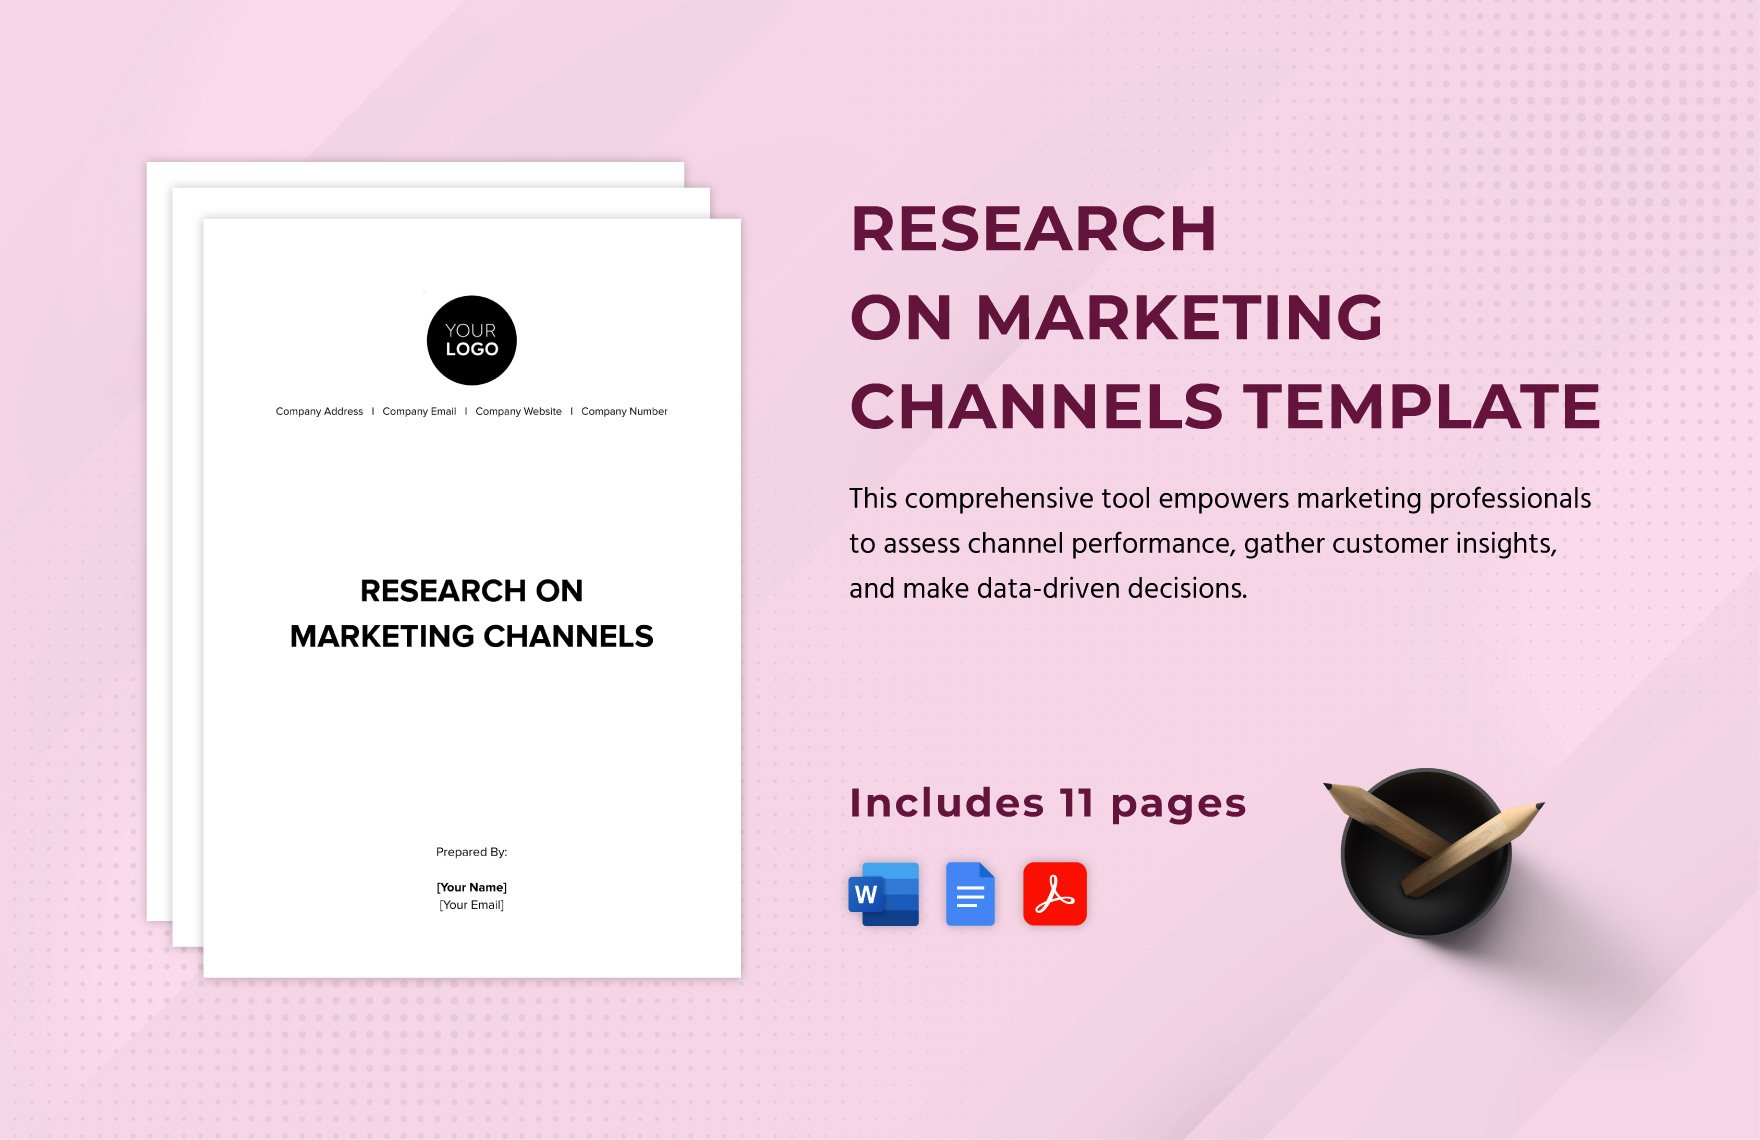 Research on Marketing Channels Template